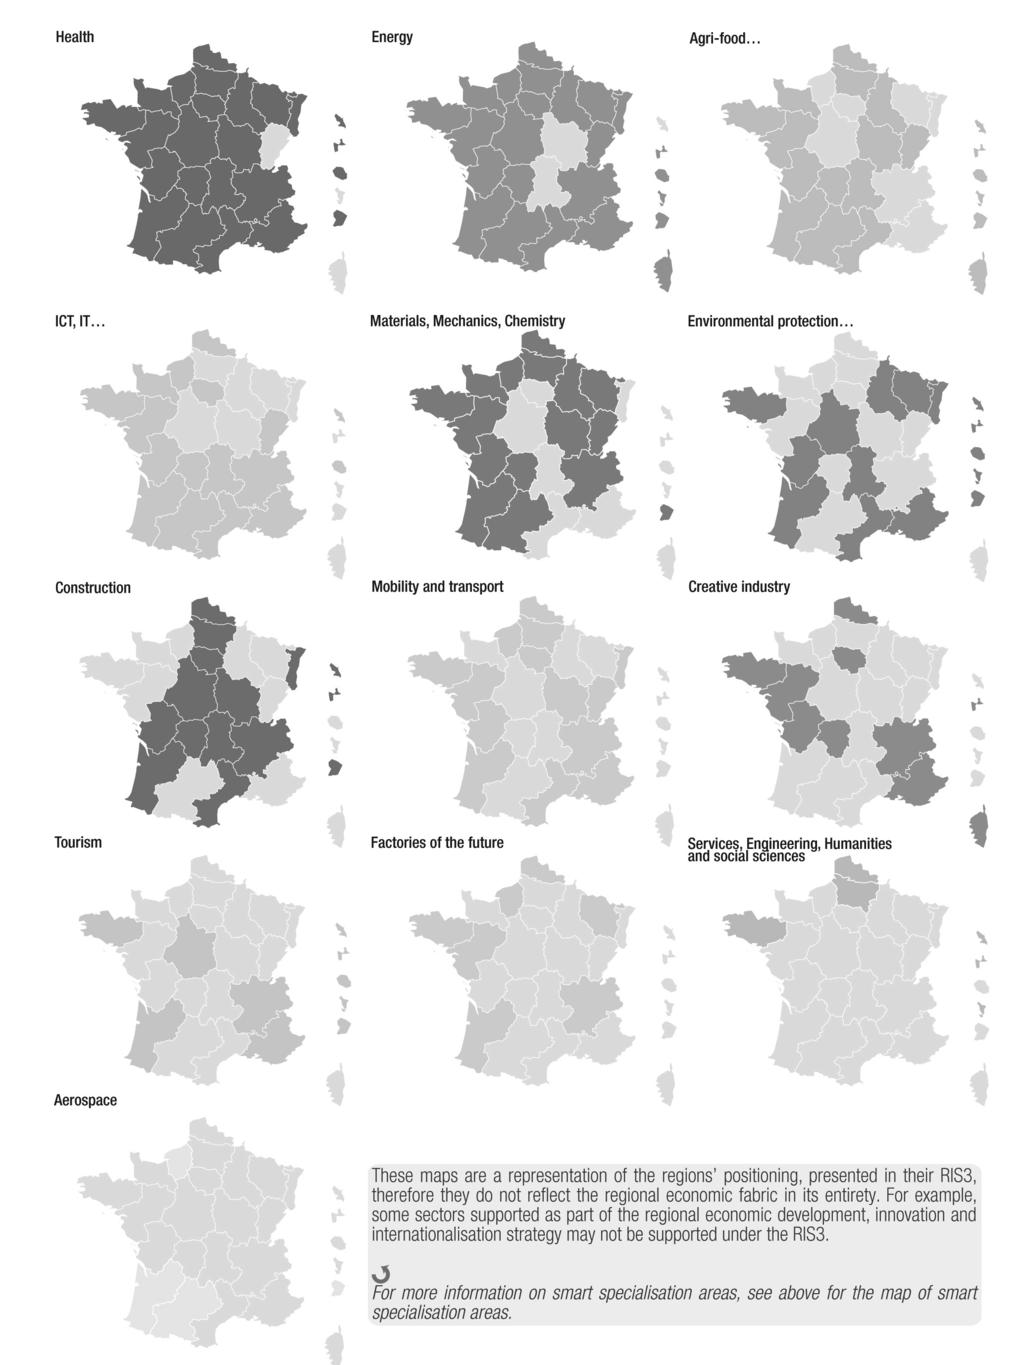 EStIF1 2017 RIS3 in the French Research and Innovation Context 5 Figure 2: Regional Positioning in the RIS3 by Target Markets. Source: CGET analysis, available online at <http://www.cget.gouv.